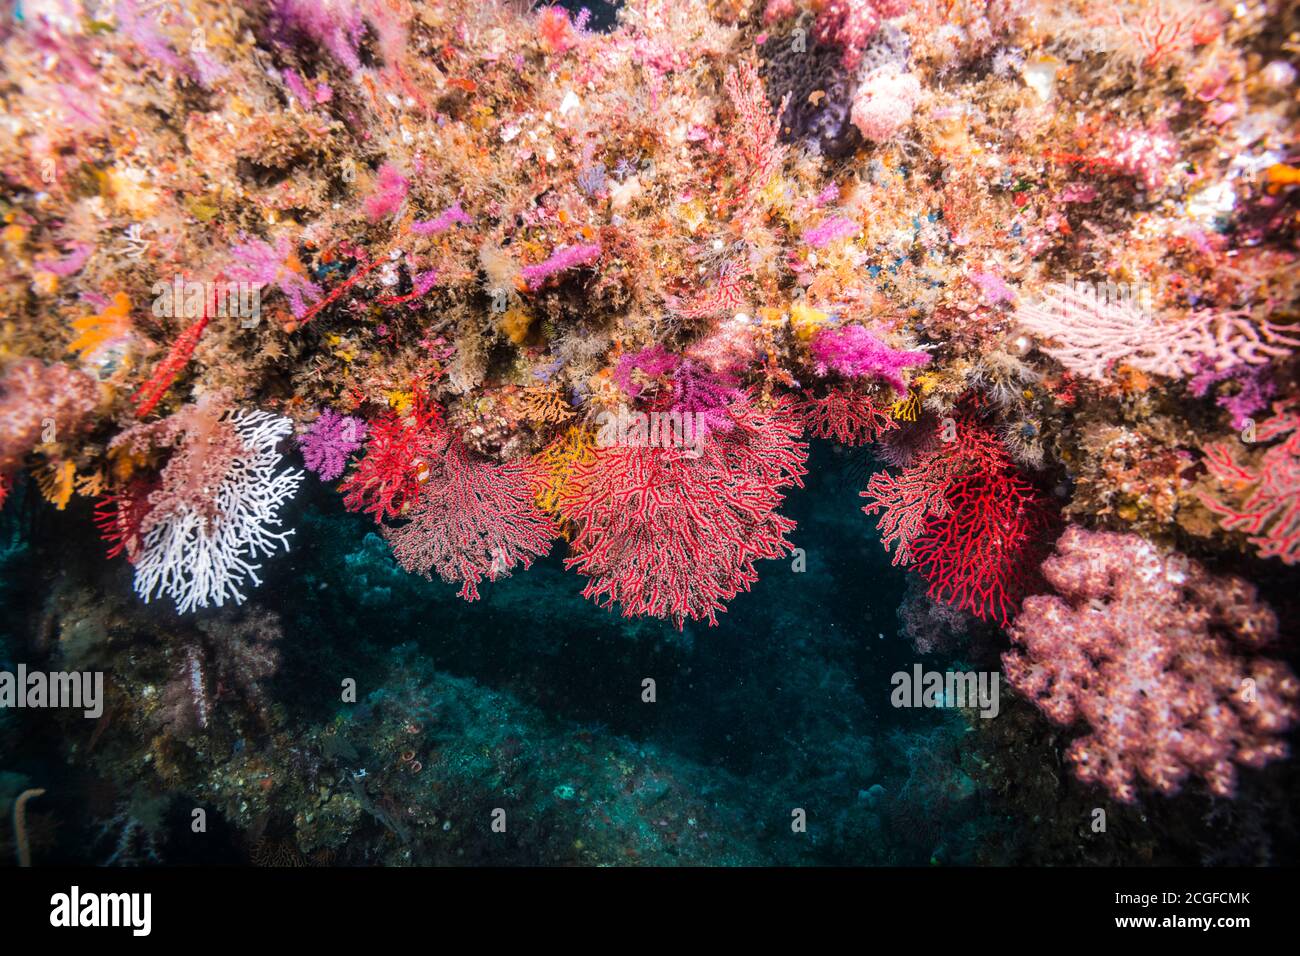 fan corals ,Melithaea flabellifera (Kükenthal, 1908), at artificial fish reef. Stock Photo